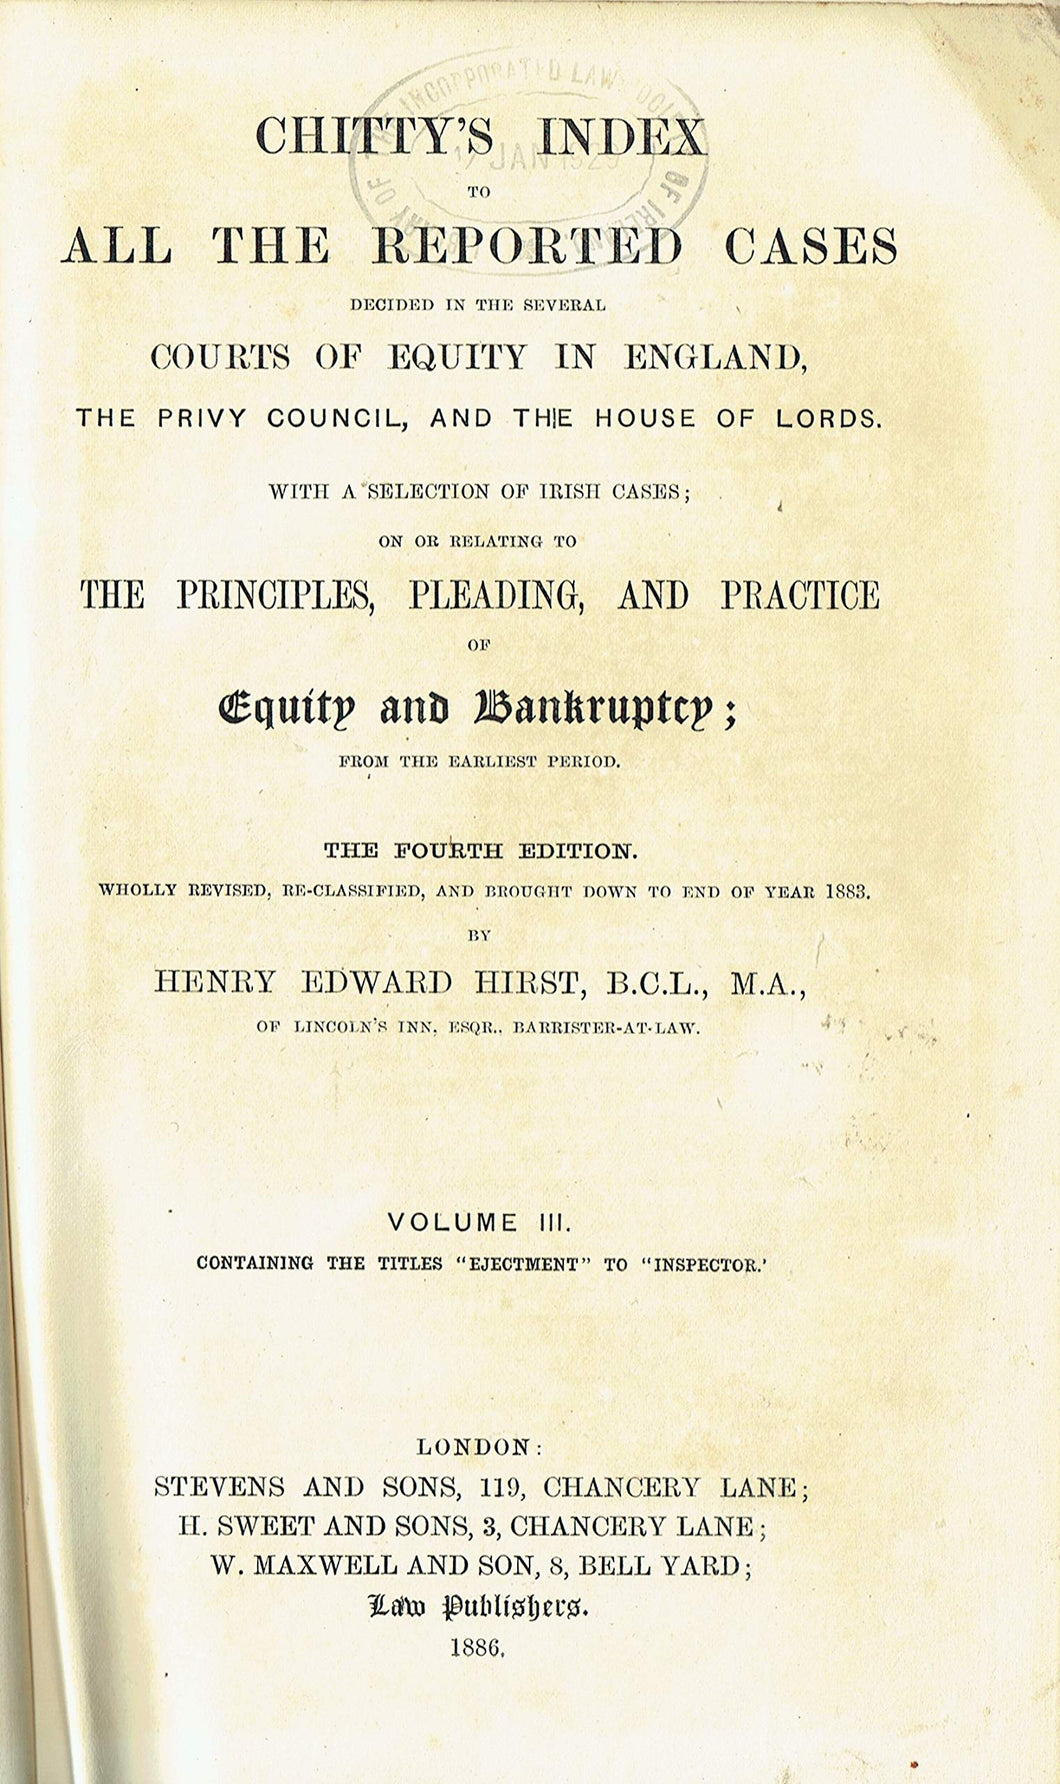 Chitty's Equity Index, Fourth Edition Volume III/Volume 3 - Chitty's Index to All the Reported Cases Decided in the Several Courts of Equity in England, the Privy Council, and the House of Lords